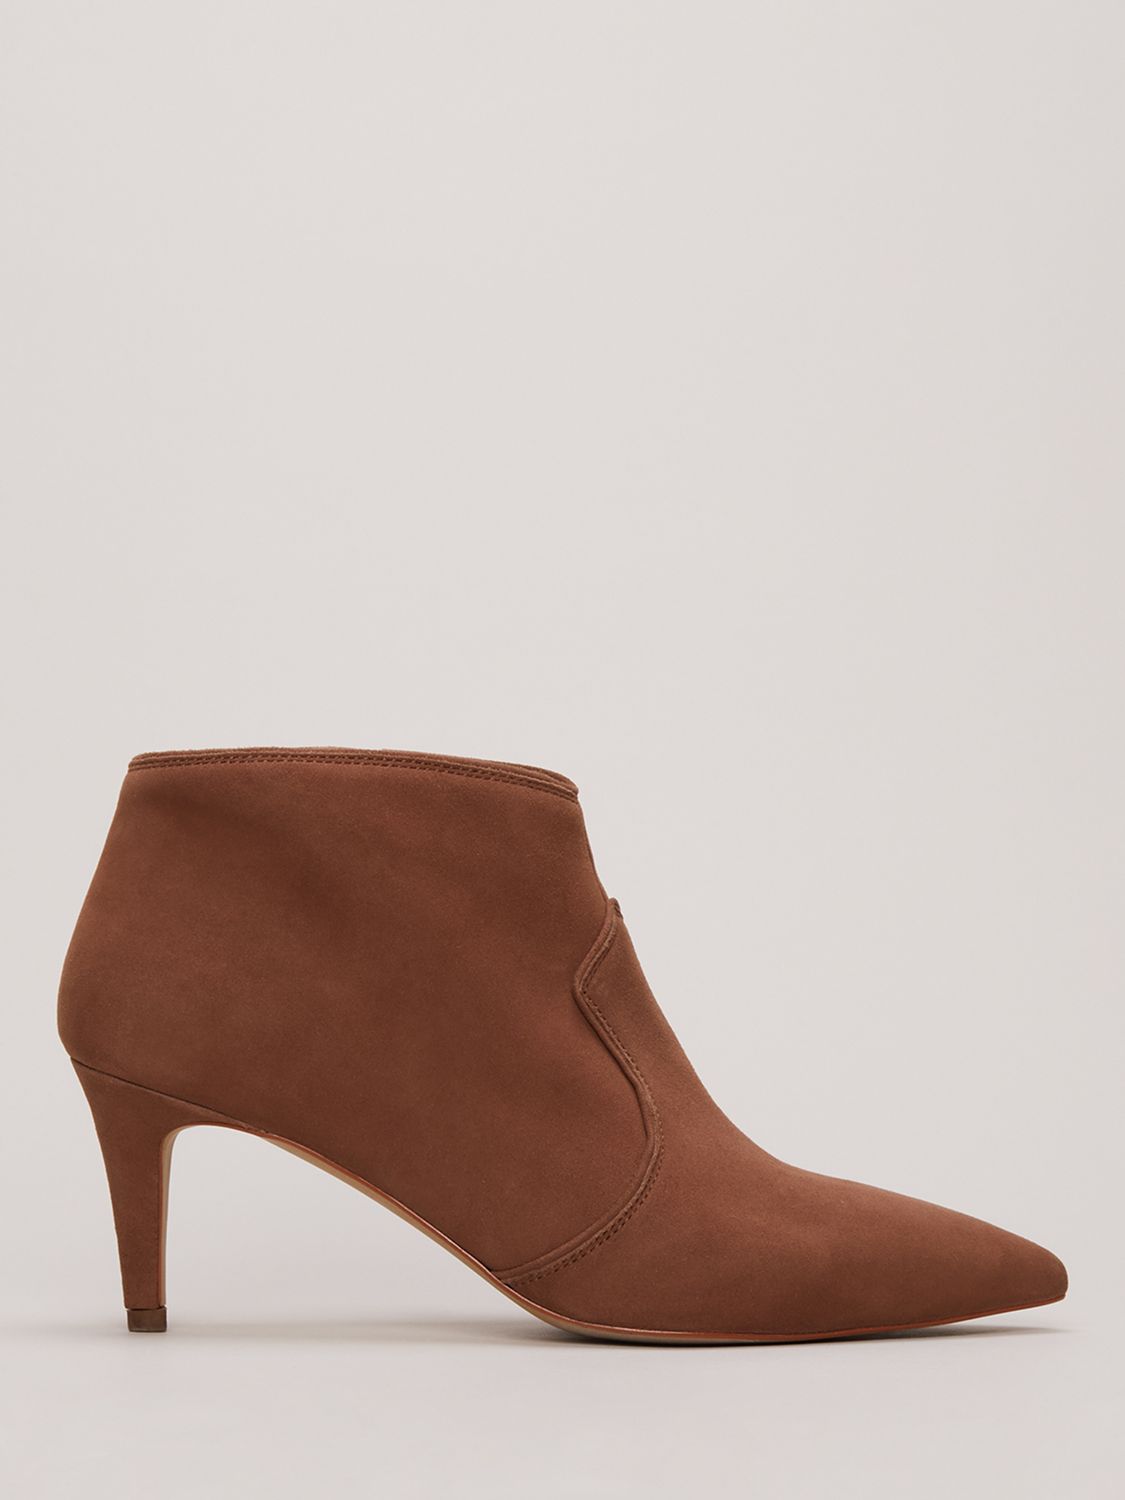 Phase Eight Suede Shoe Boots, Tan at John Lewis & Partners